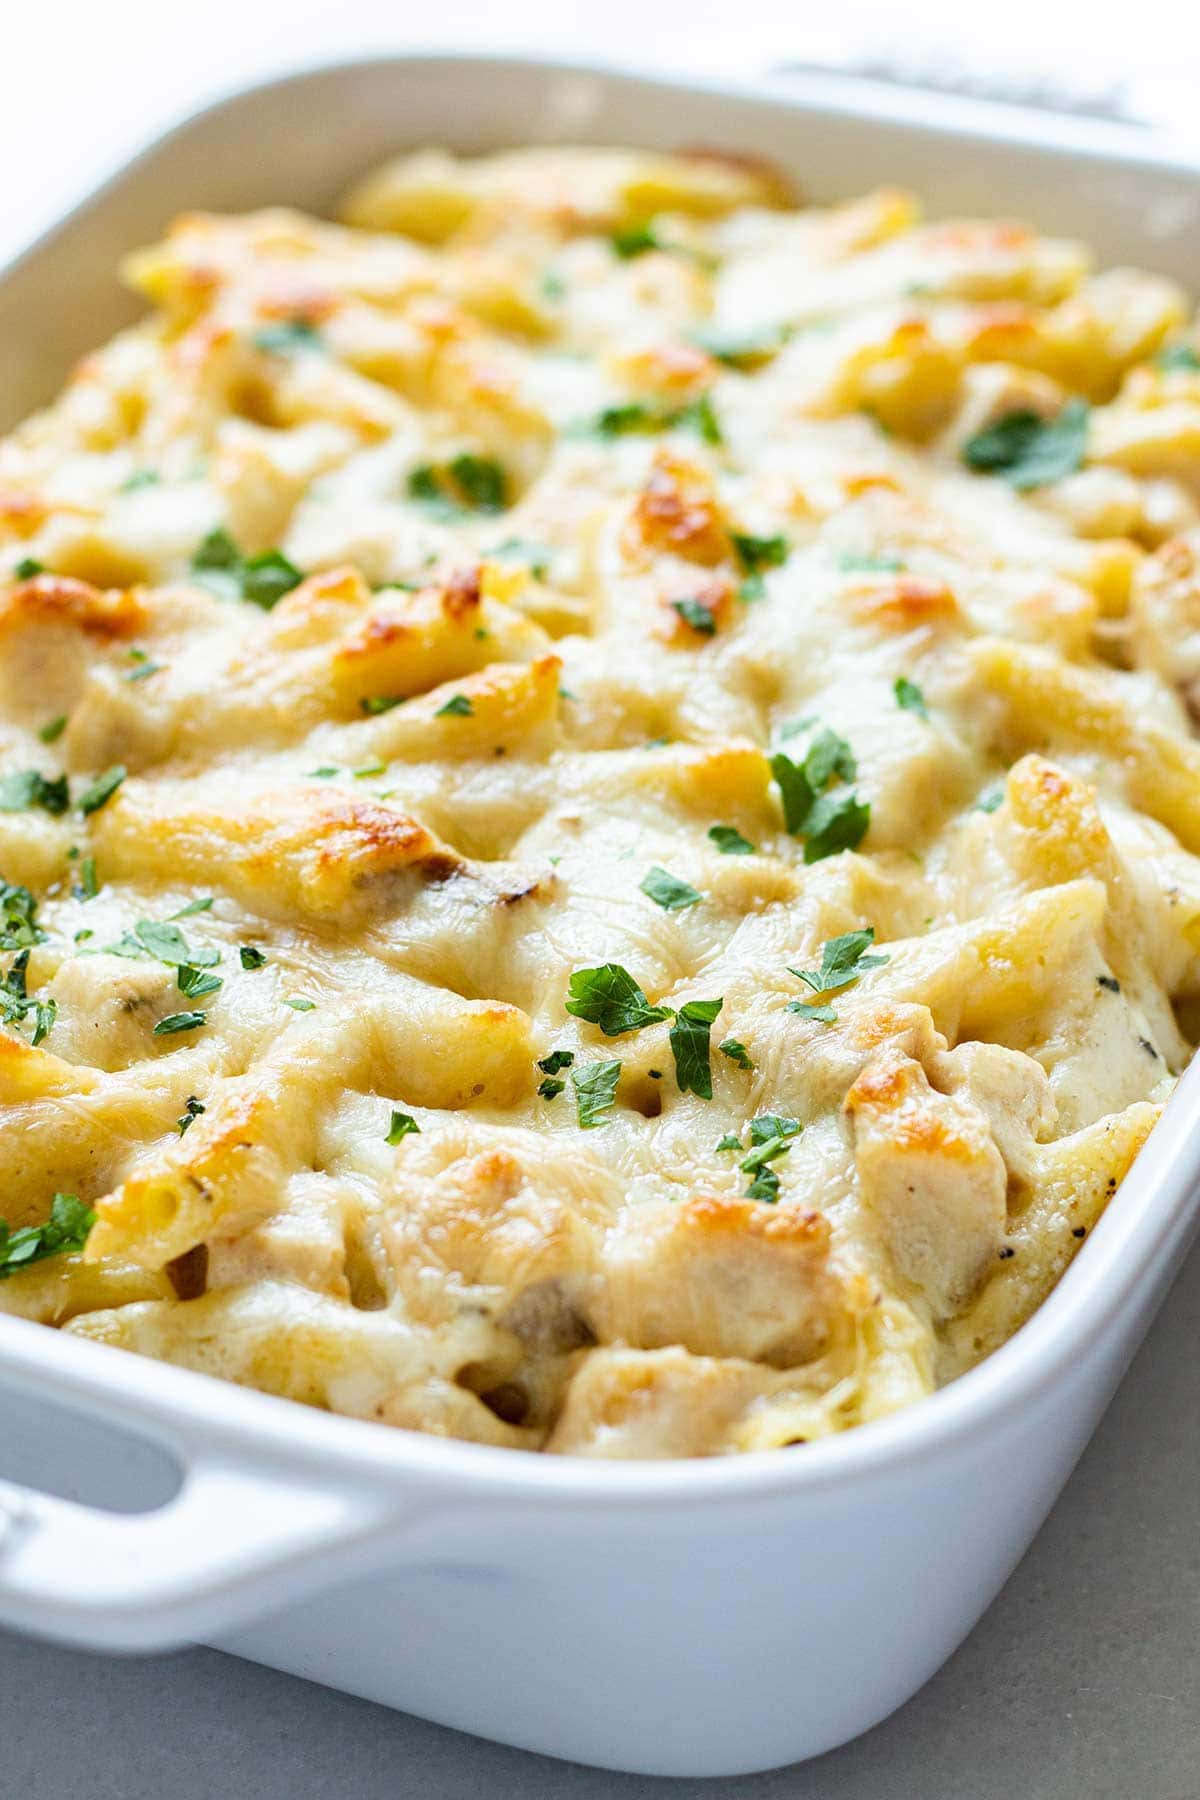 Chicken Alfredo Bake cooked in a rectangular white baking dish, topped with melted mozzarella cheese and garnished with fresh green parsley.